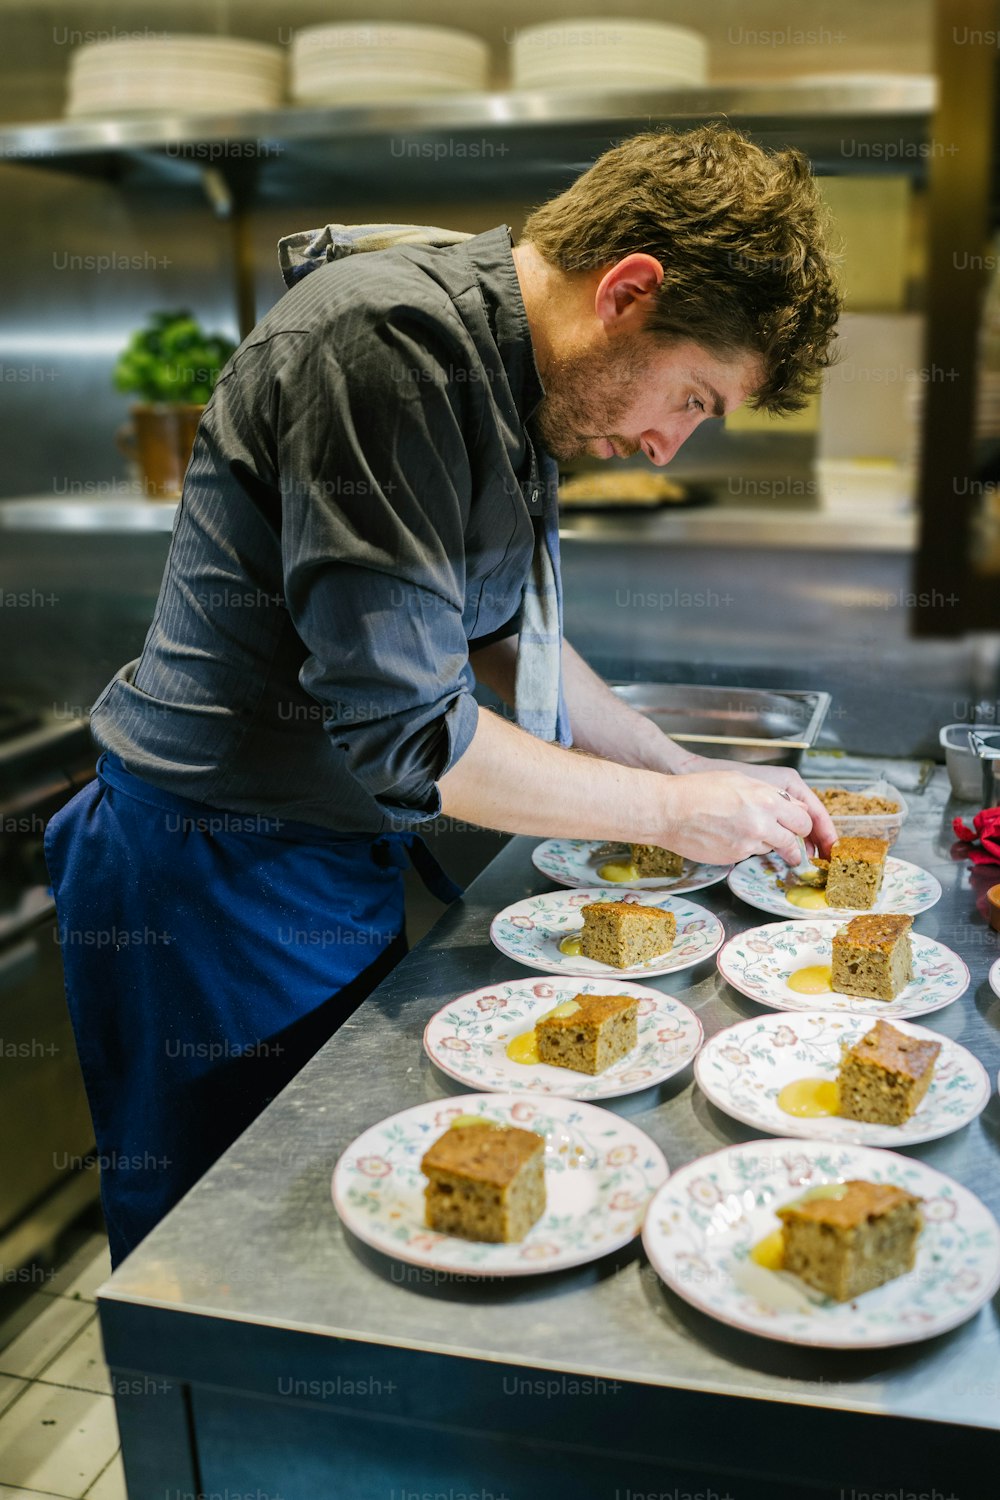 a man in a kitchen preparing food on plates